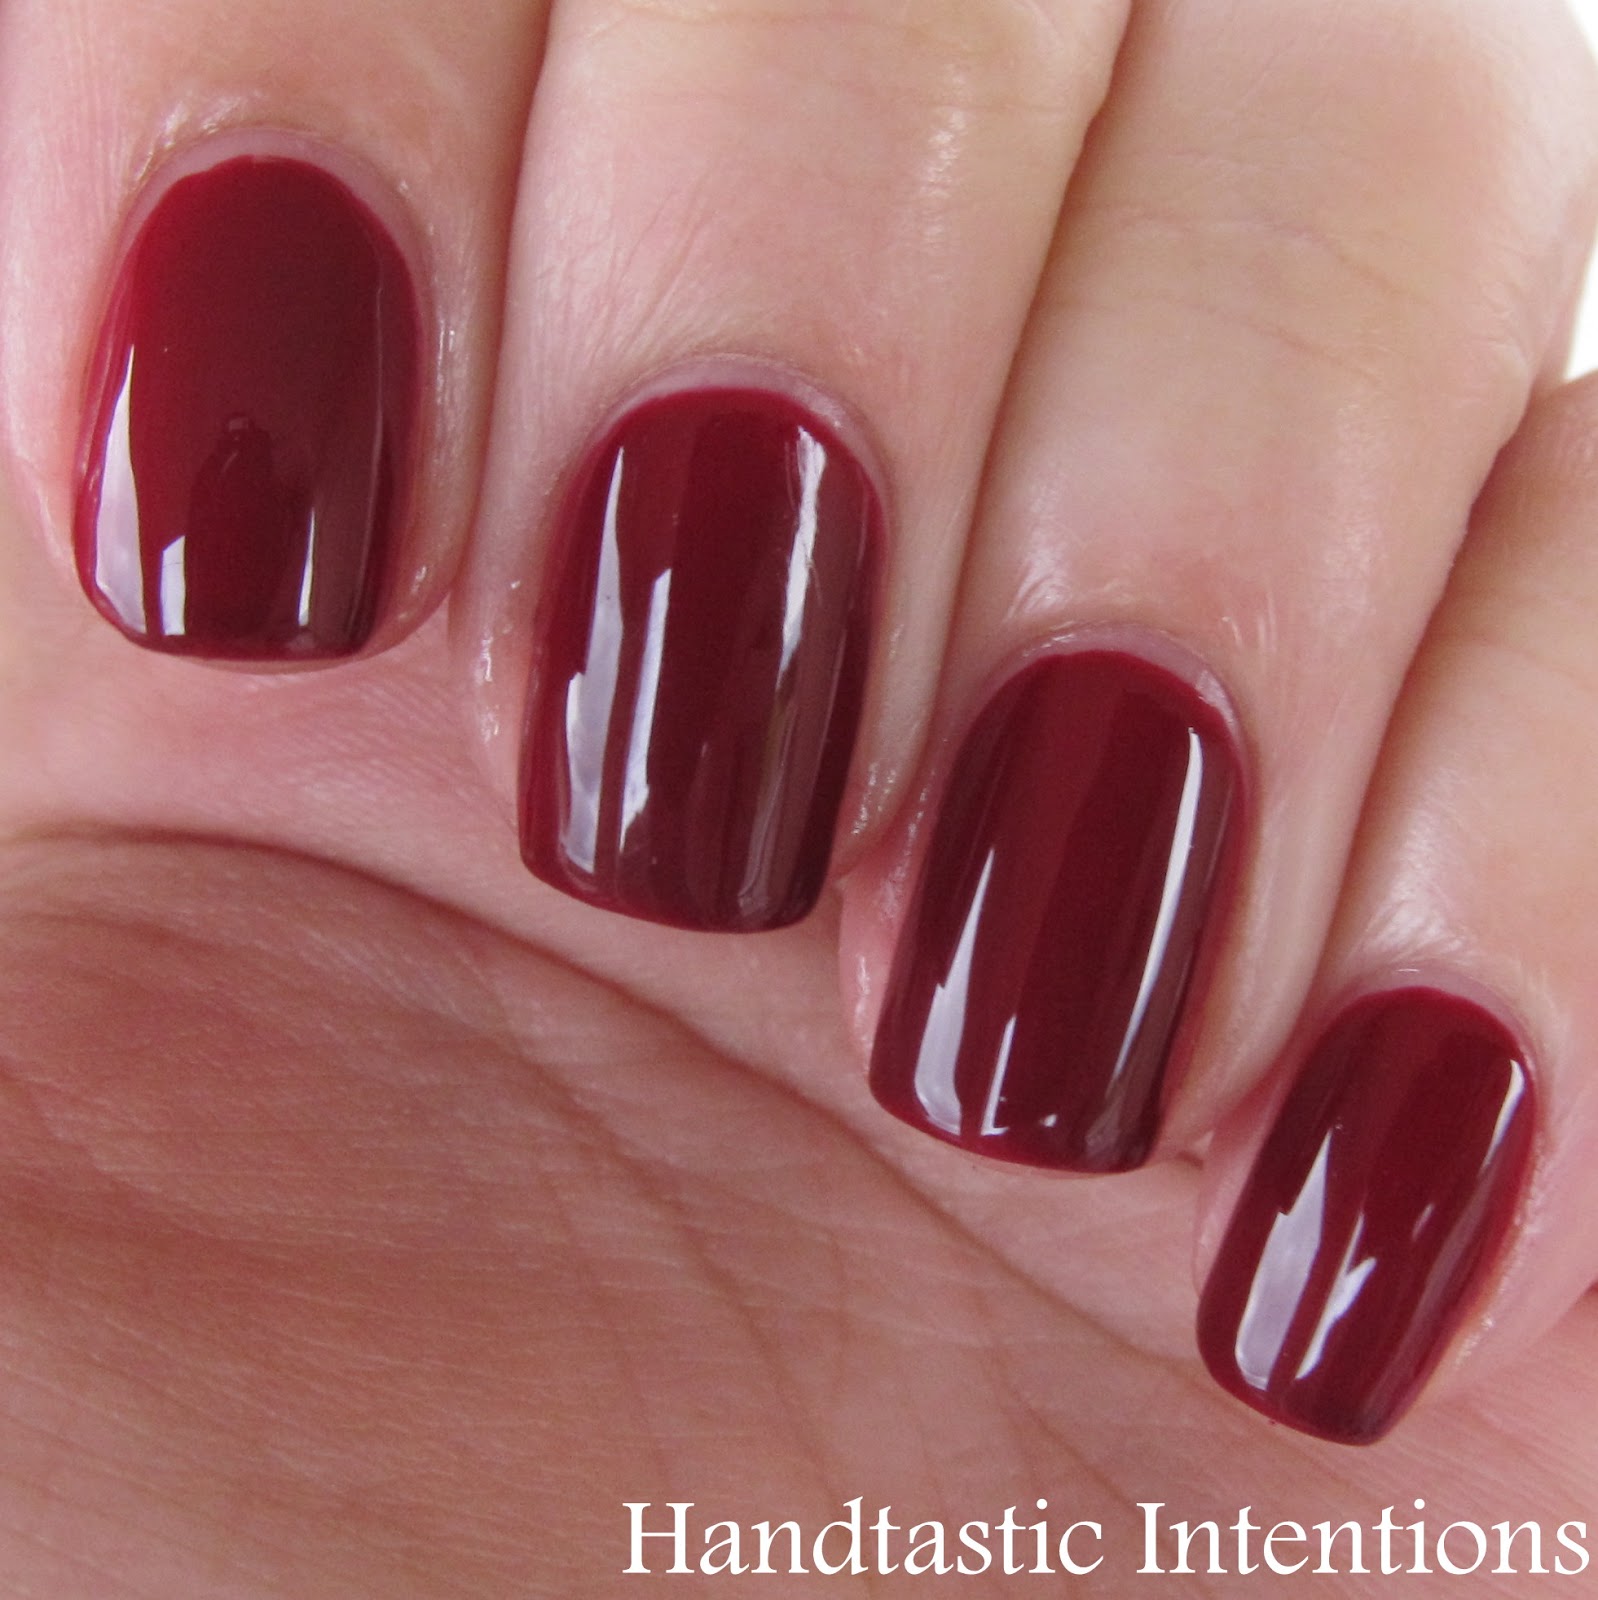 Handtastic Intentions: Swatch and Review of Avon Cherry Jubilee and Untamed